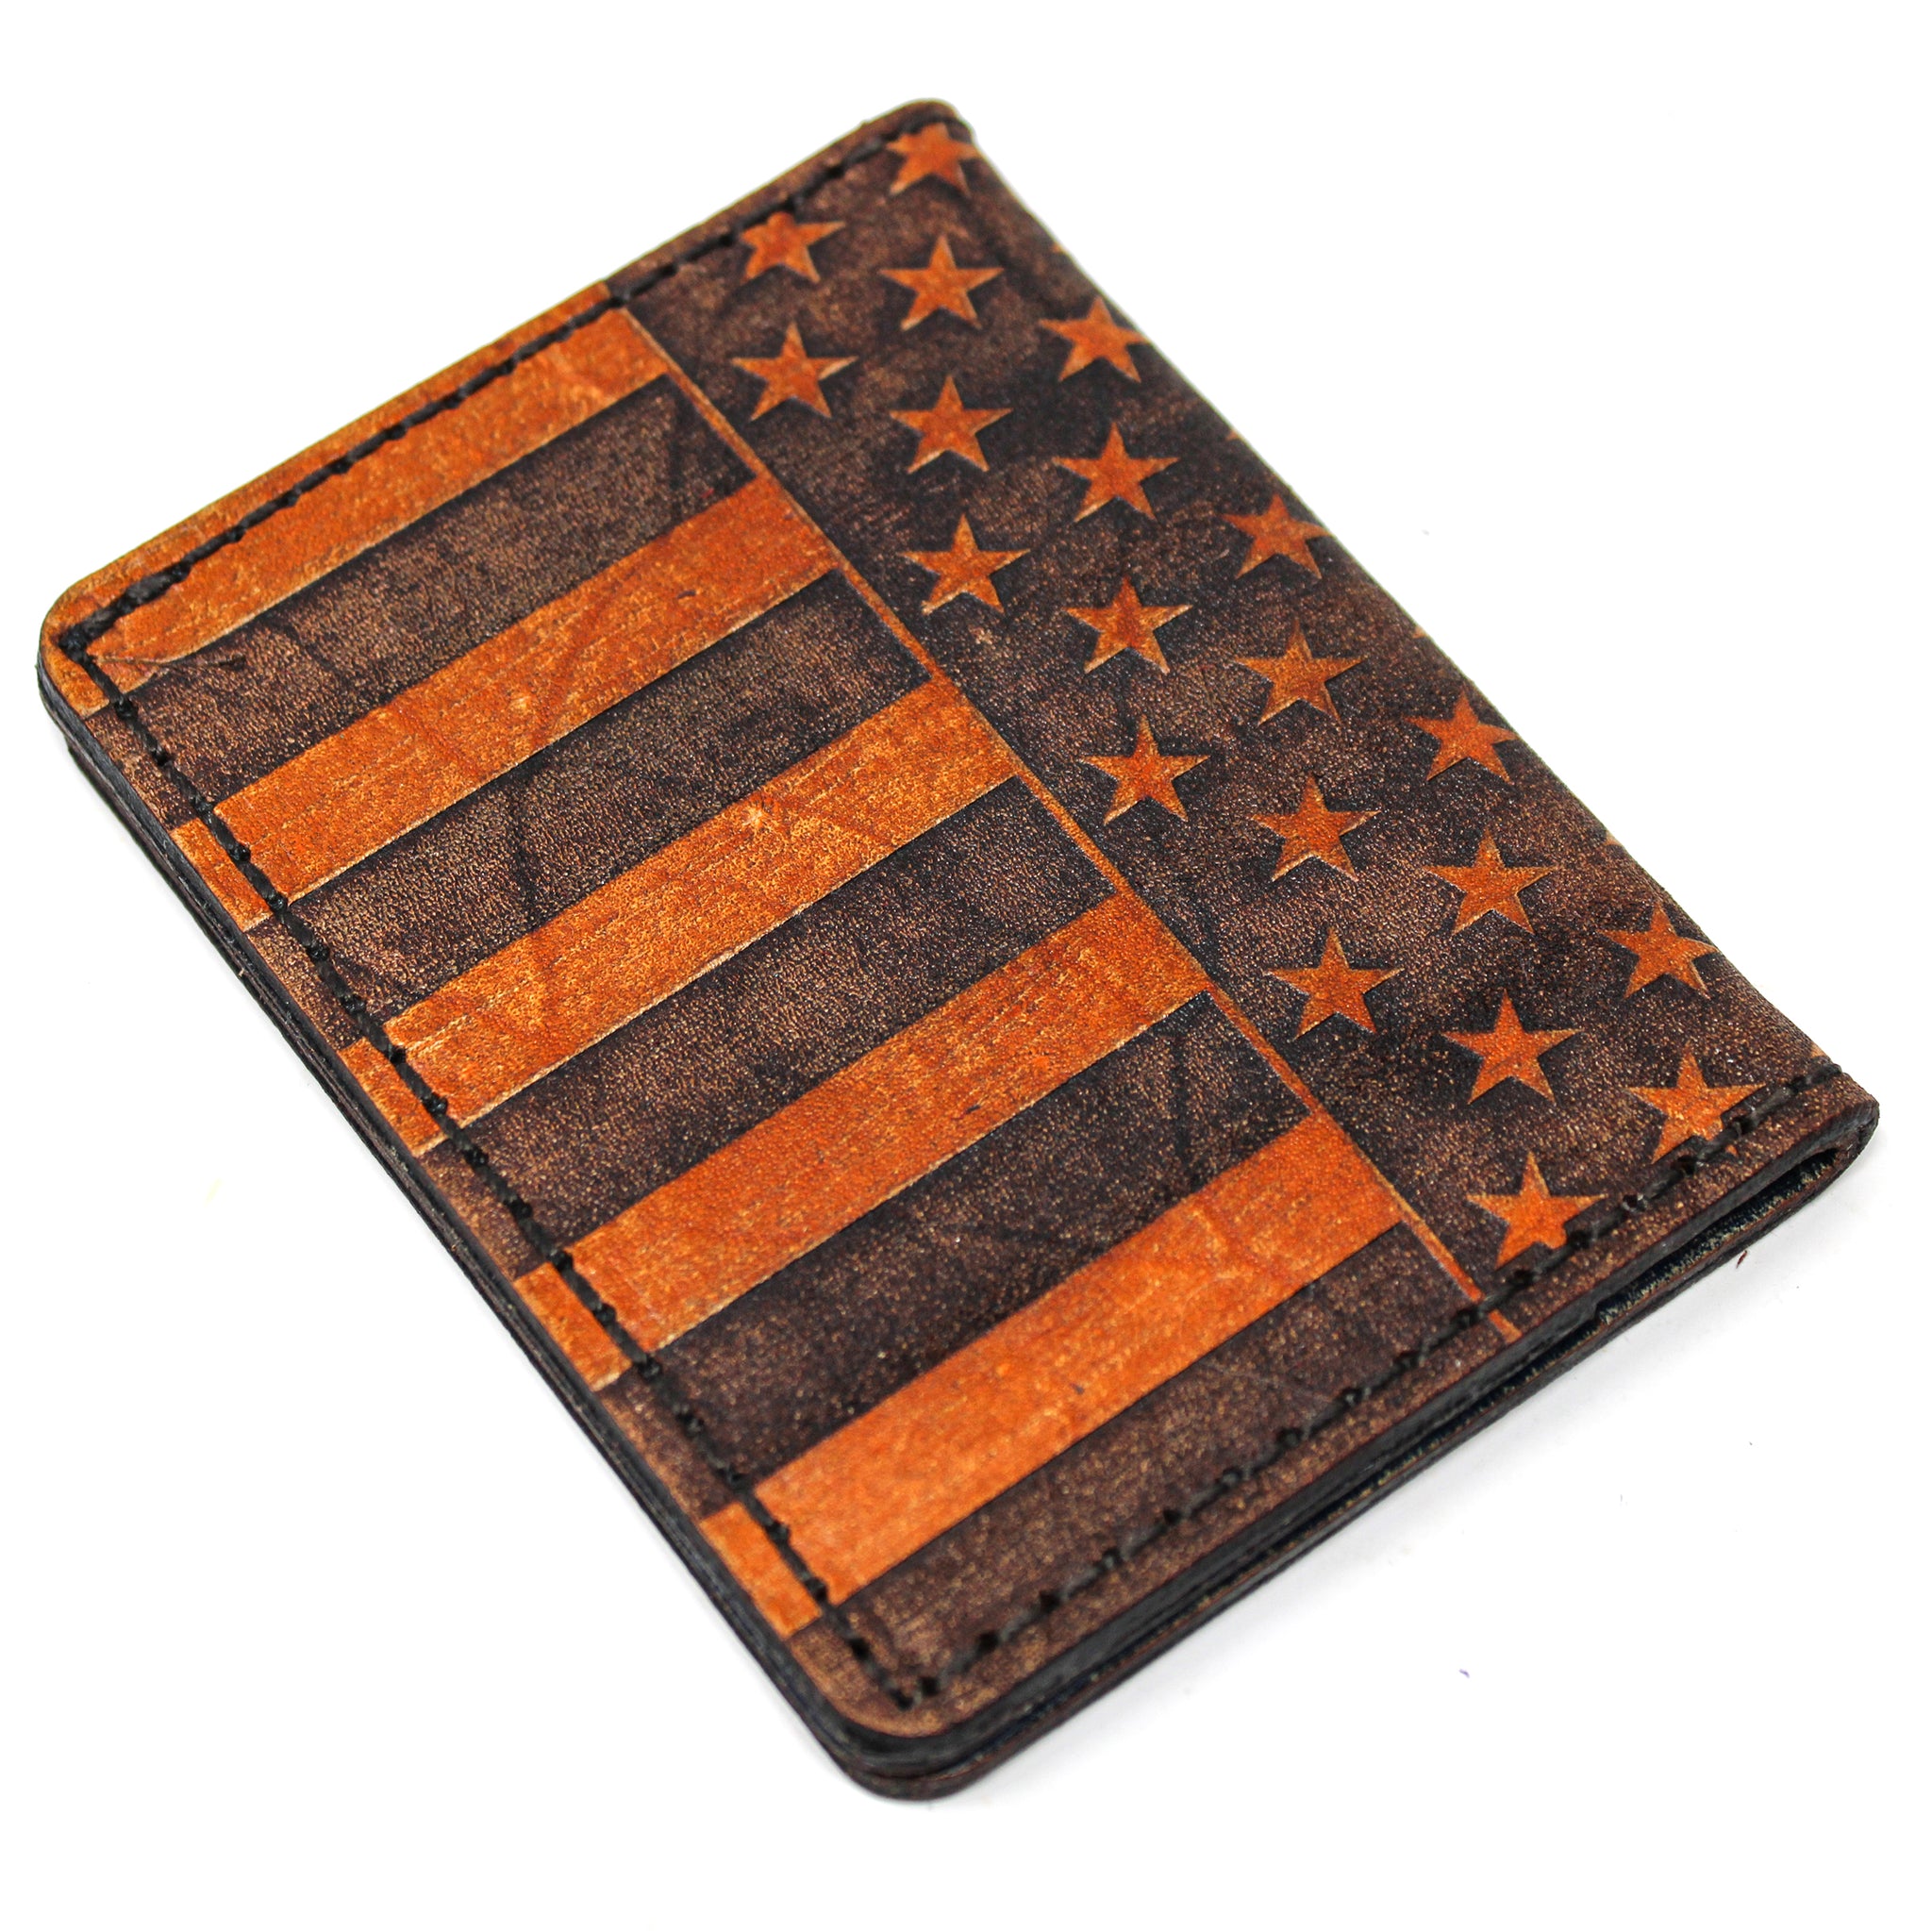 Leather Wallet - Stars and Bars